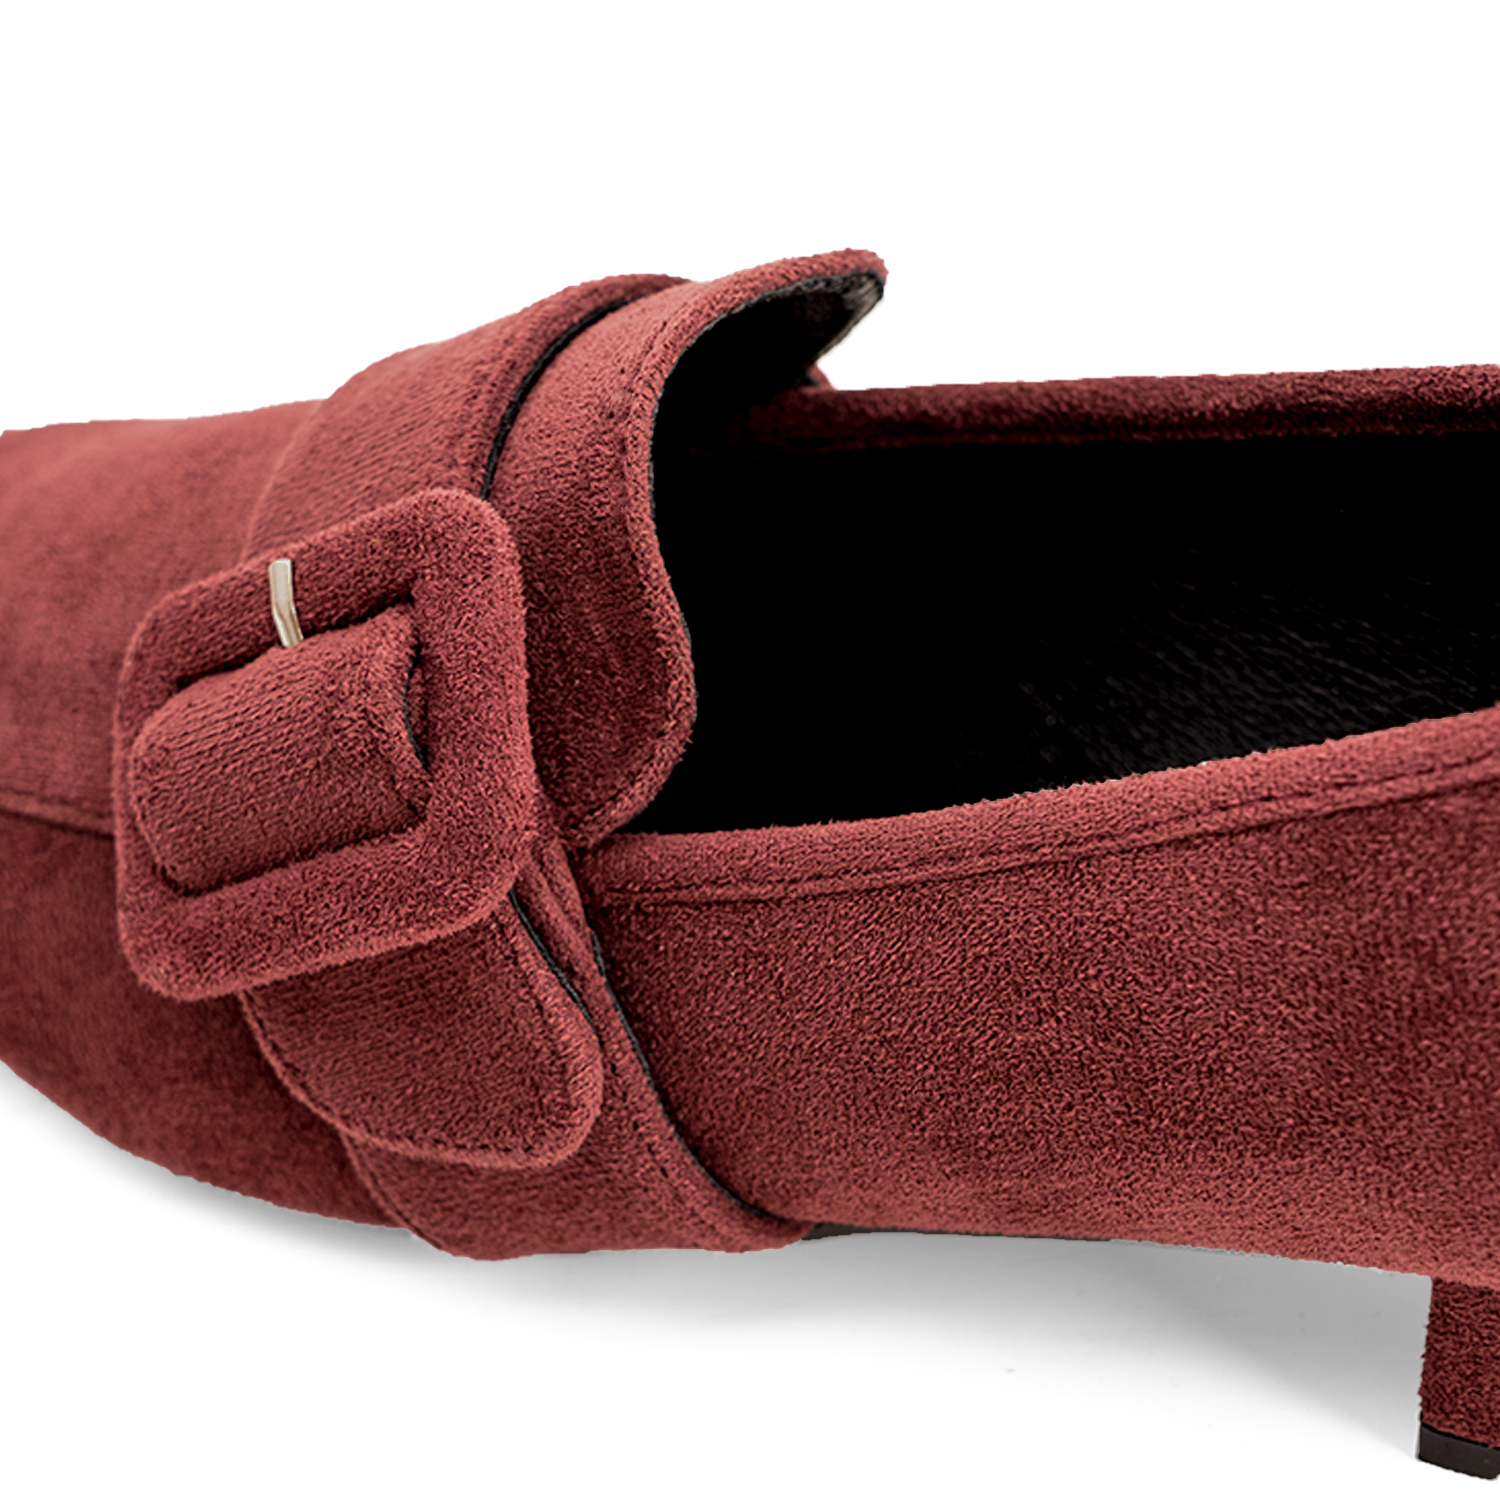 Moccasins in bordeaux faux suede and buckle detail 